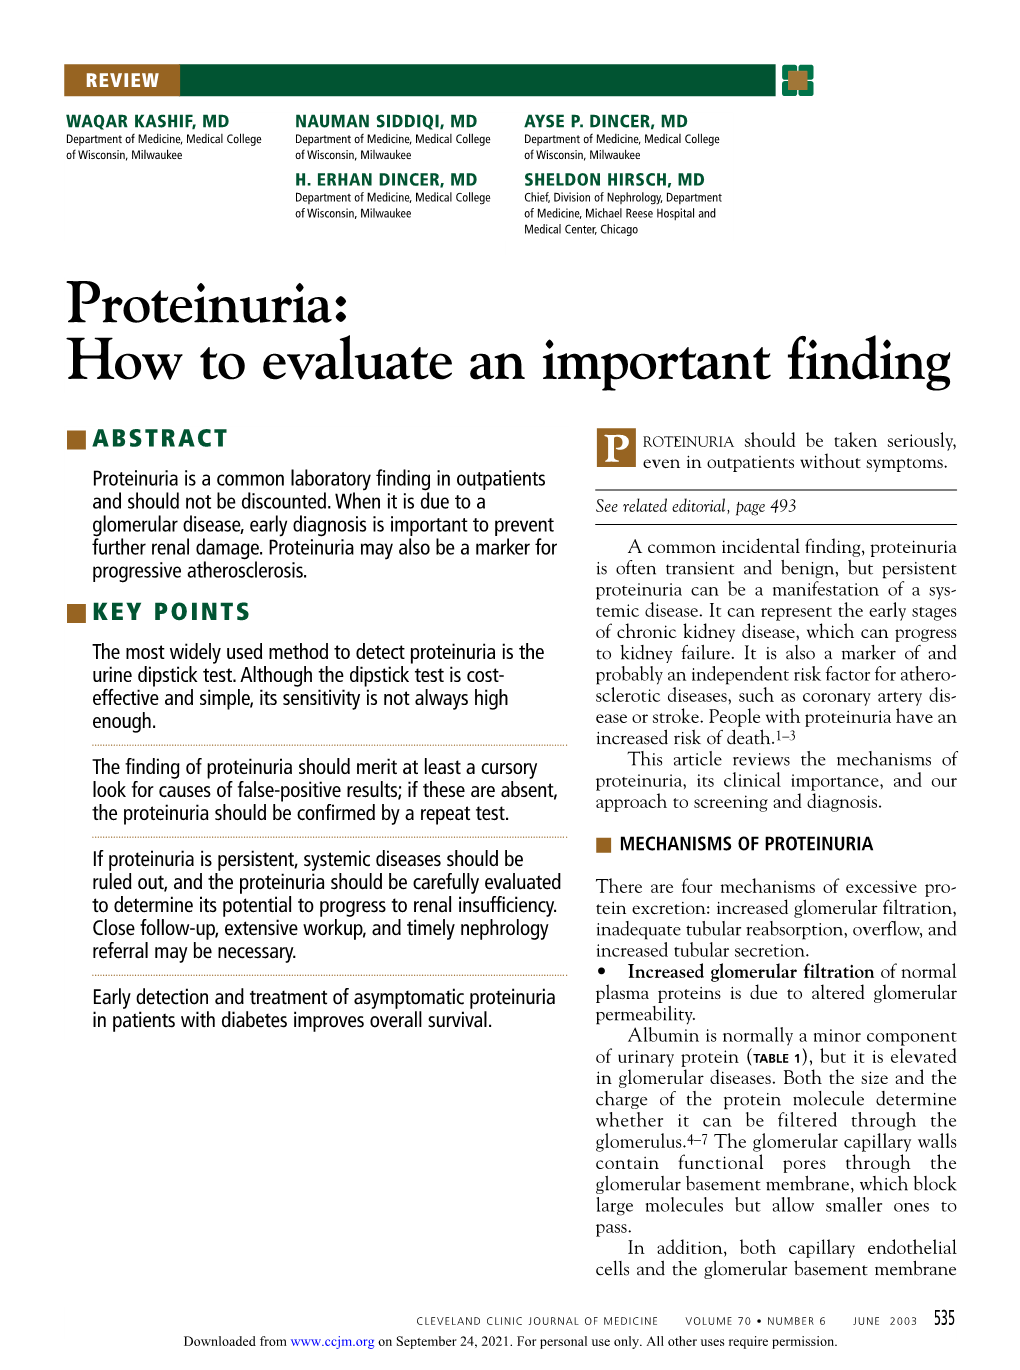 Proteinuria: How to Evaluate an Important Finding